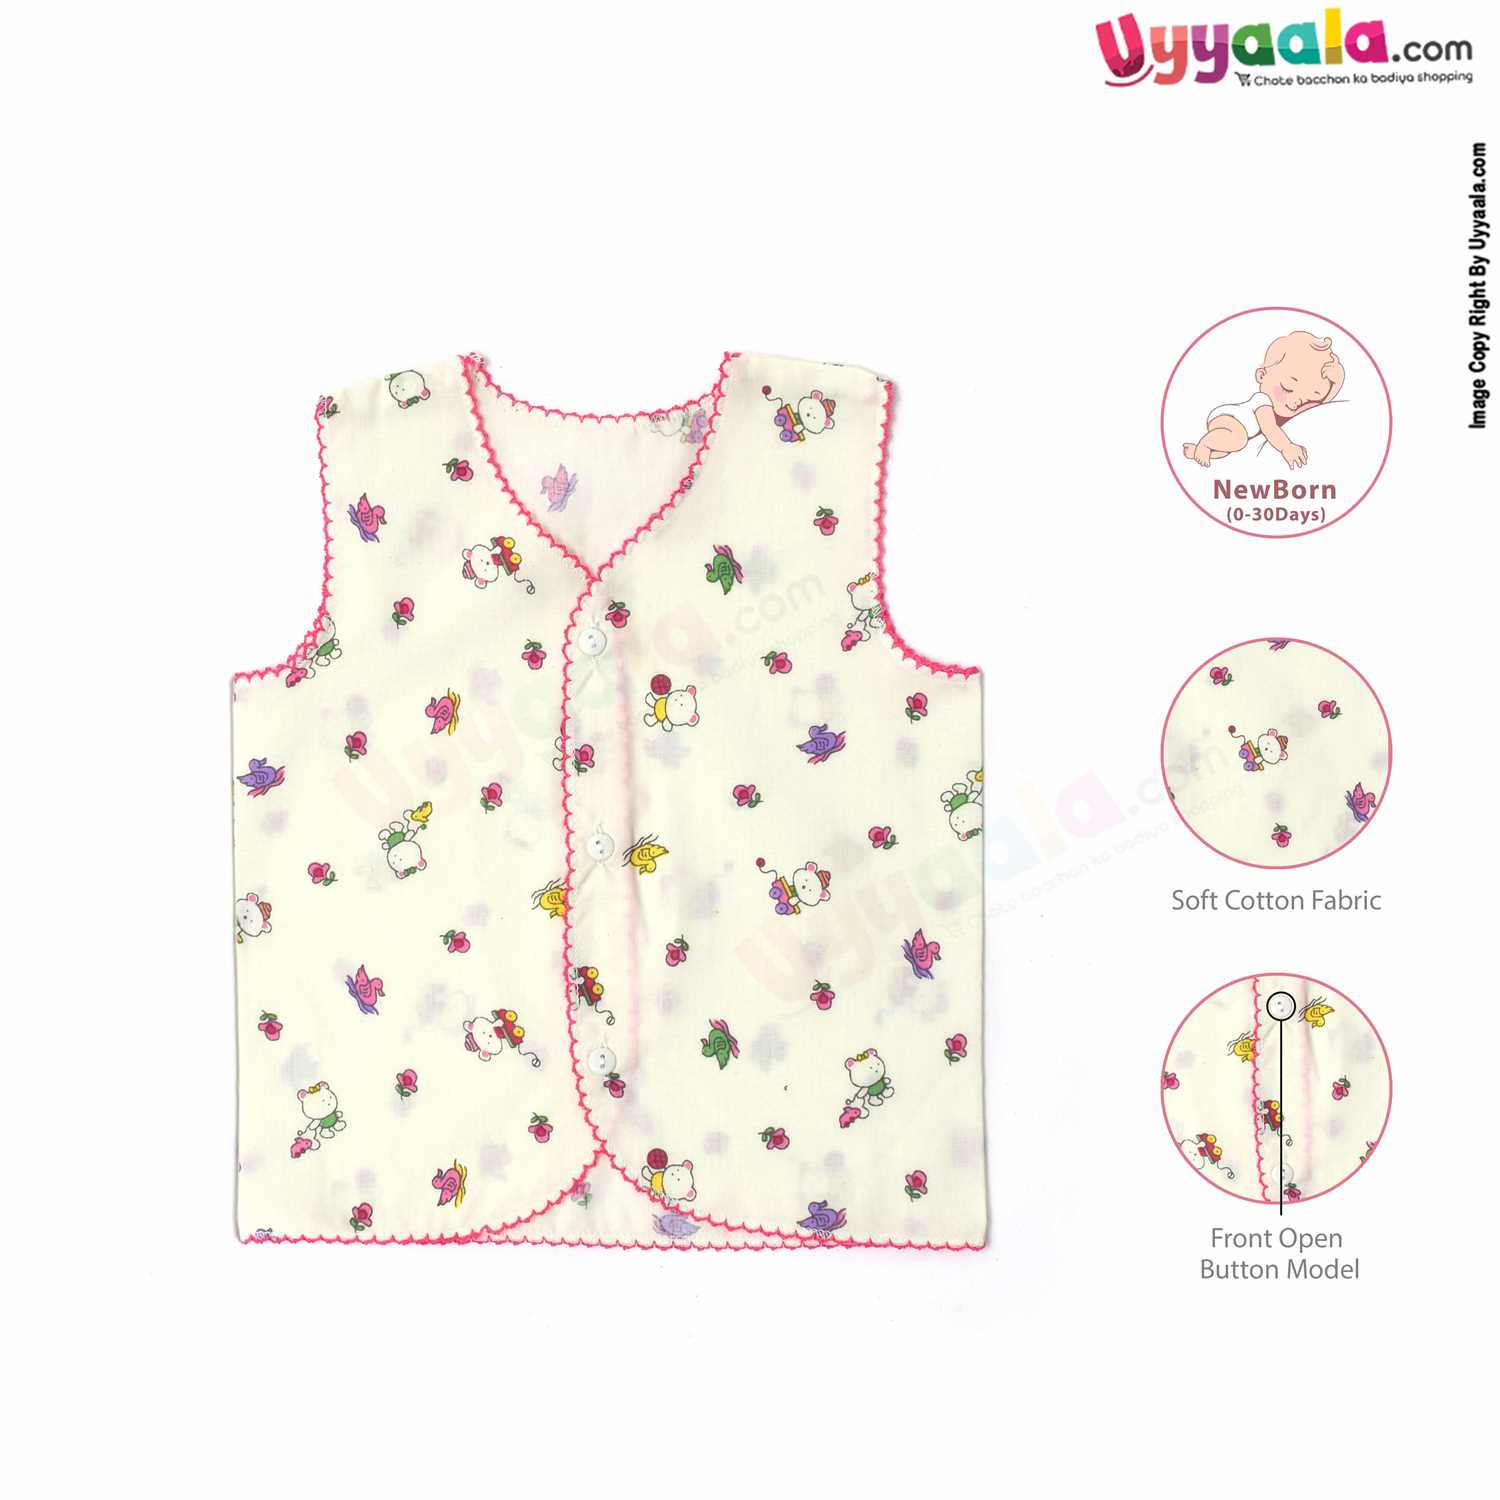 SNUG UP Sleeveless Baby Jabla Set, Front Opening Button Model, Premium Quality Cotton Baby Wear, Assorted Prints, (0-30 Days), 5 Pack - Multi color